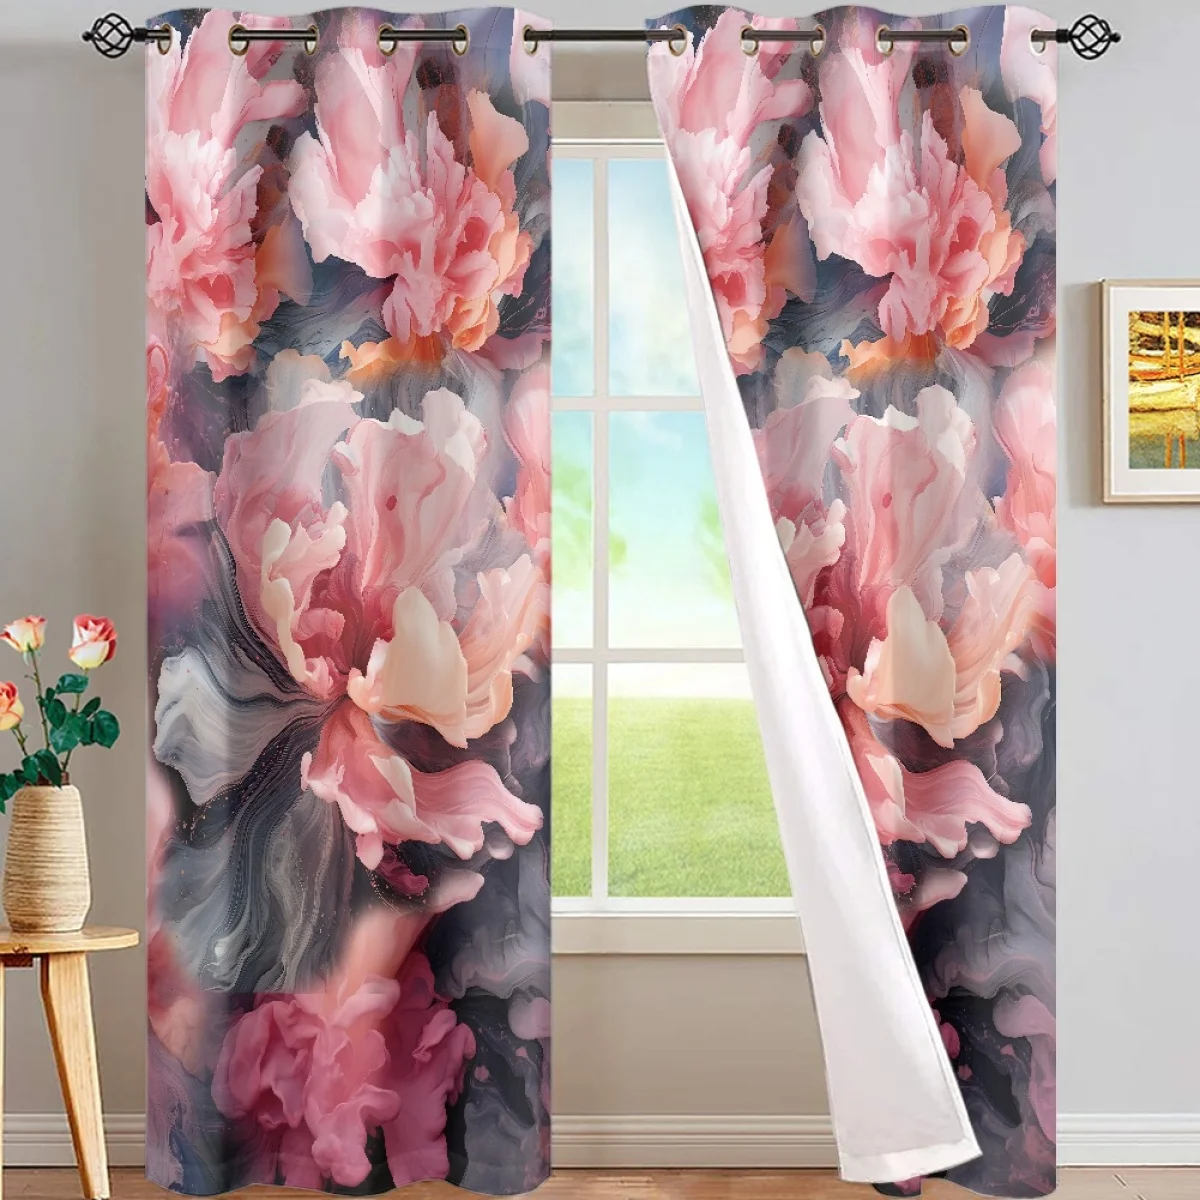 

High Quality Tie-dye Process Exquisite Patterns Curtains Semi-shading Soft Skin-friendly Bedroom Children's Room Bathroom Drapes